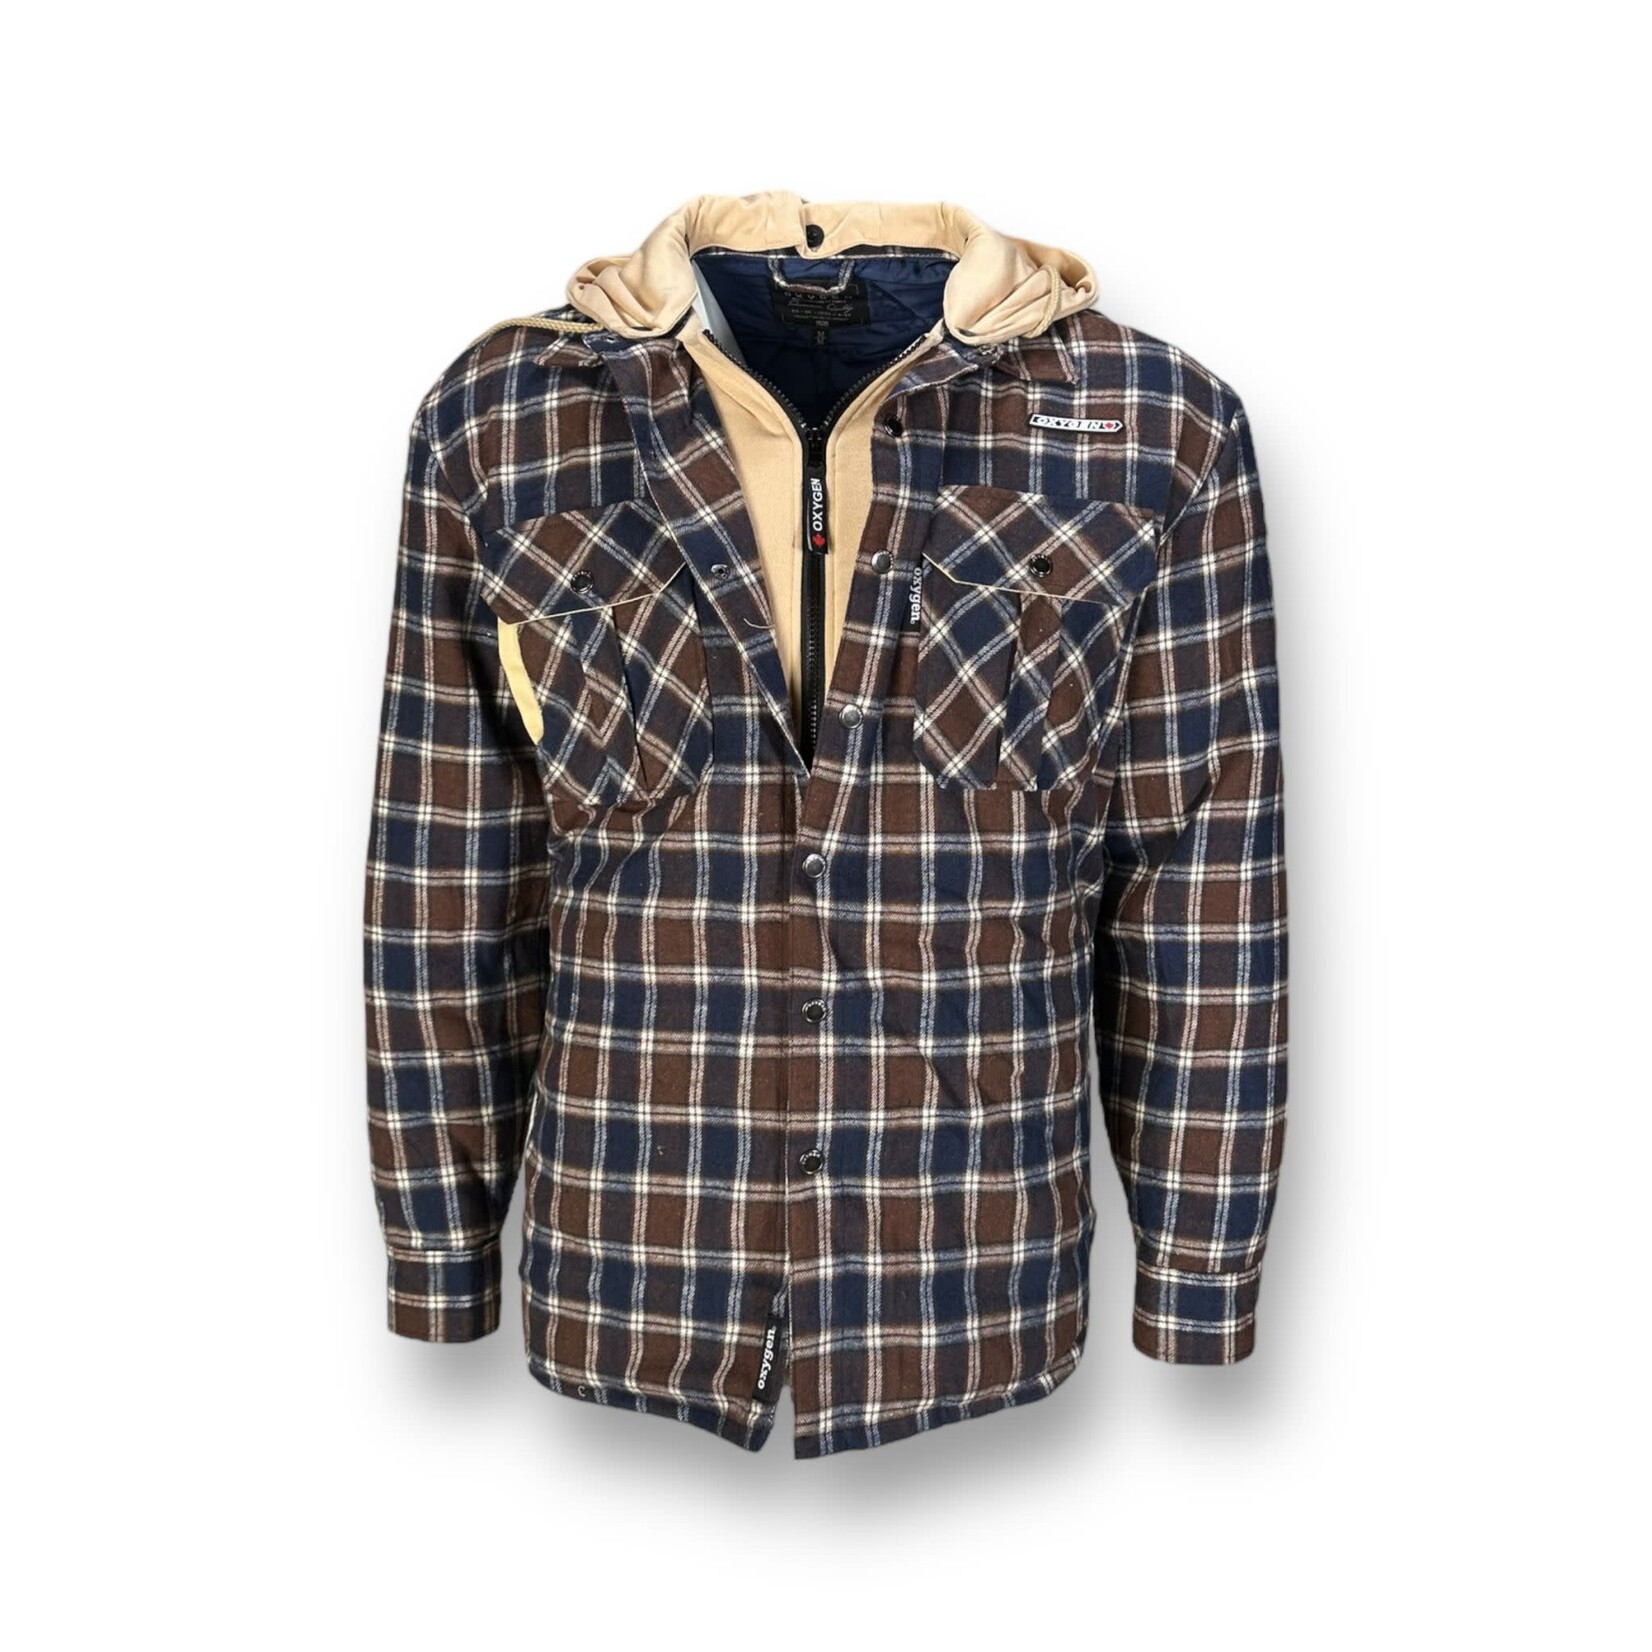 Oxygen Lined Plaid Shirt Jacket With Hoodie